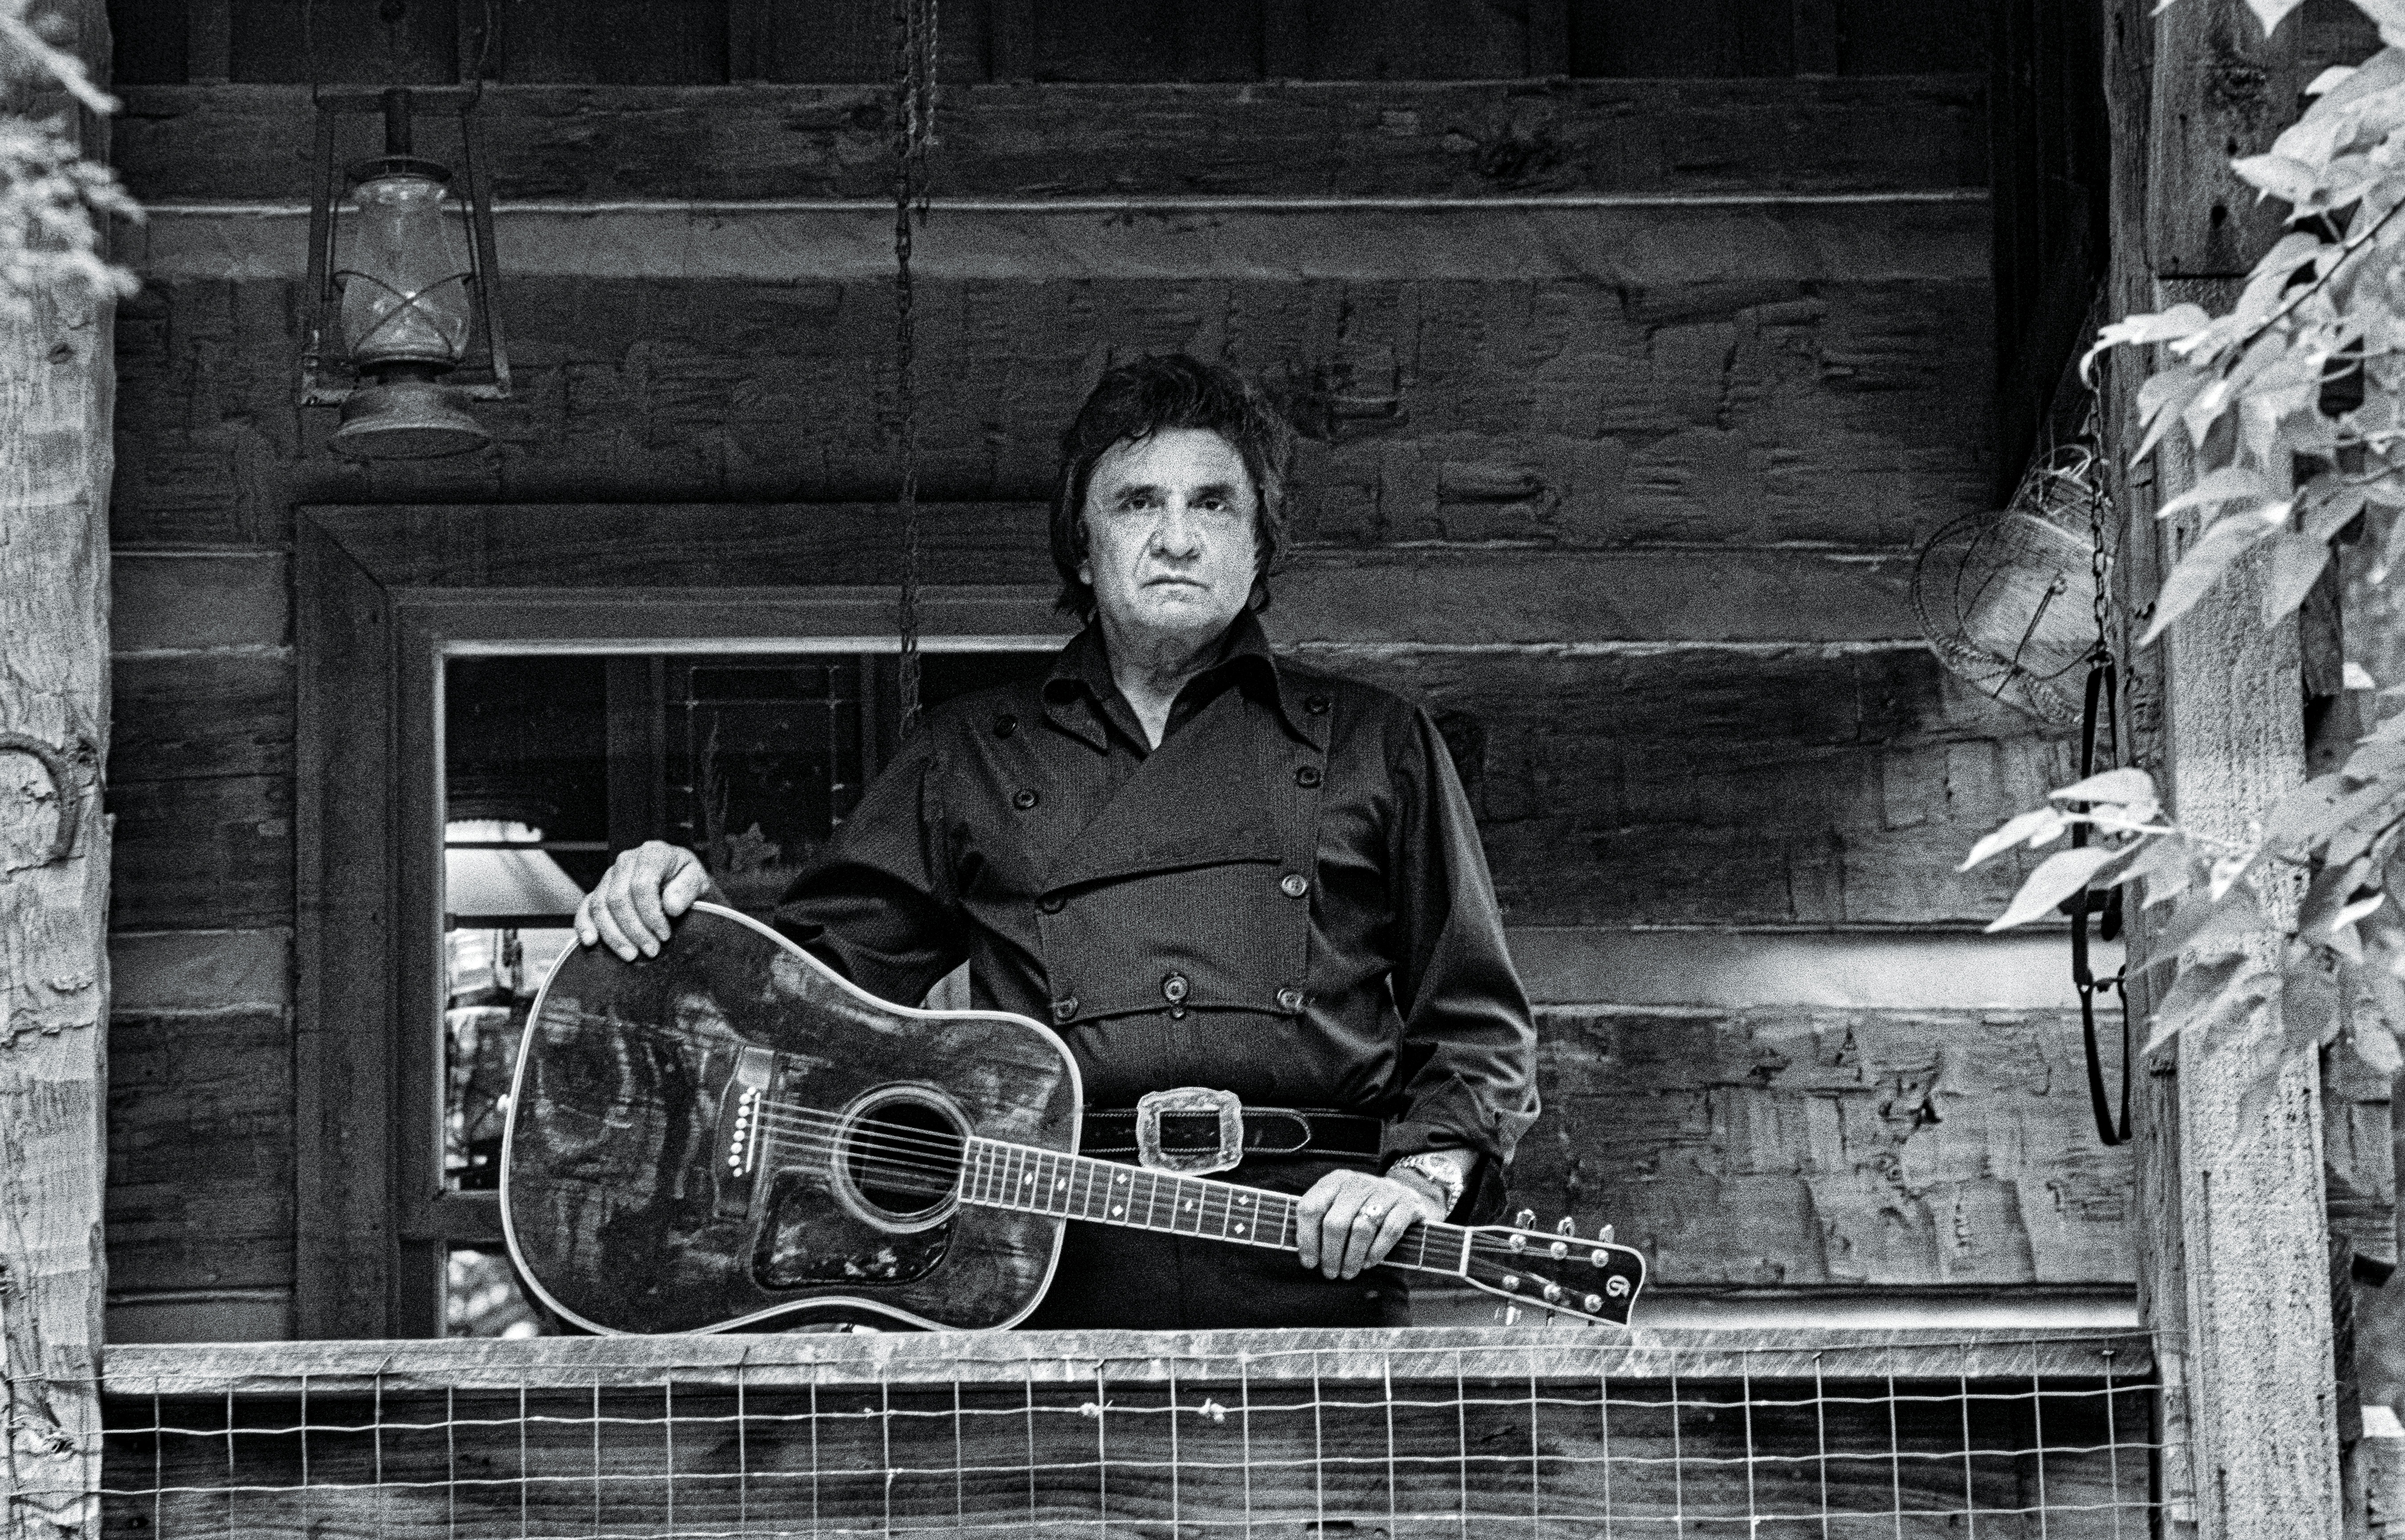 Johnny Cash-Cash Cabin-Porch with Guitar-May 1987 (Credit_Alan Messer).jpg (8.40 MB)